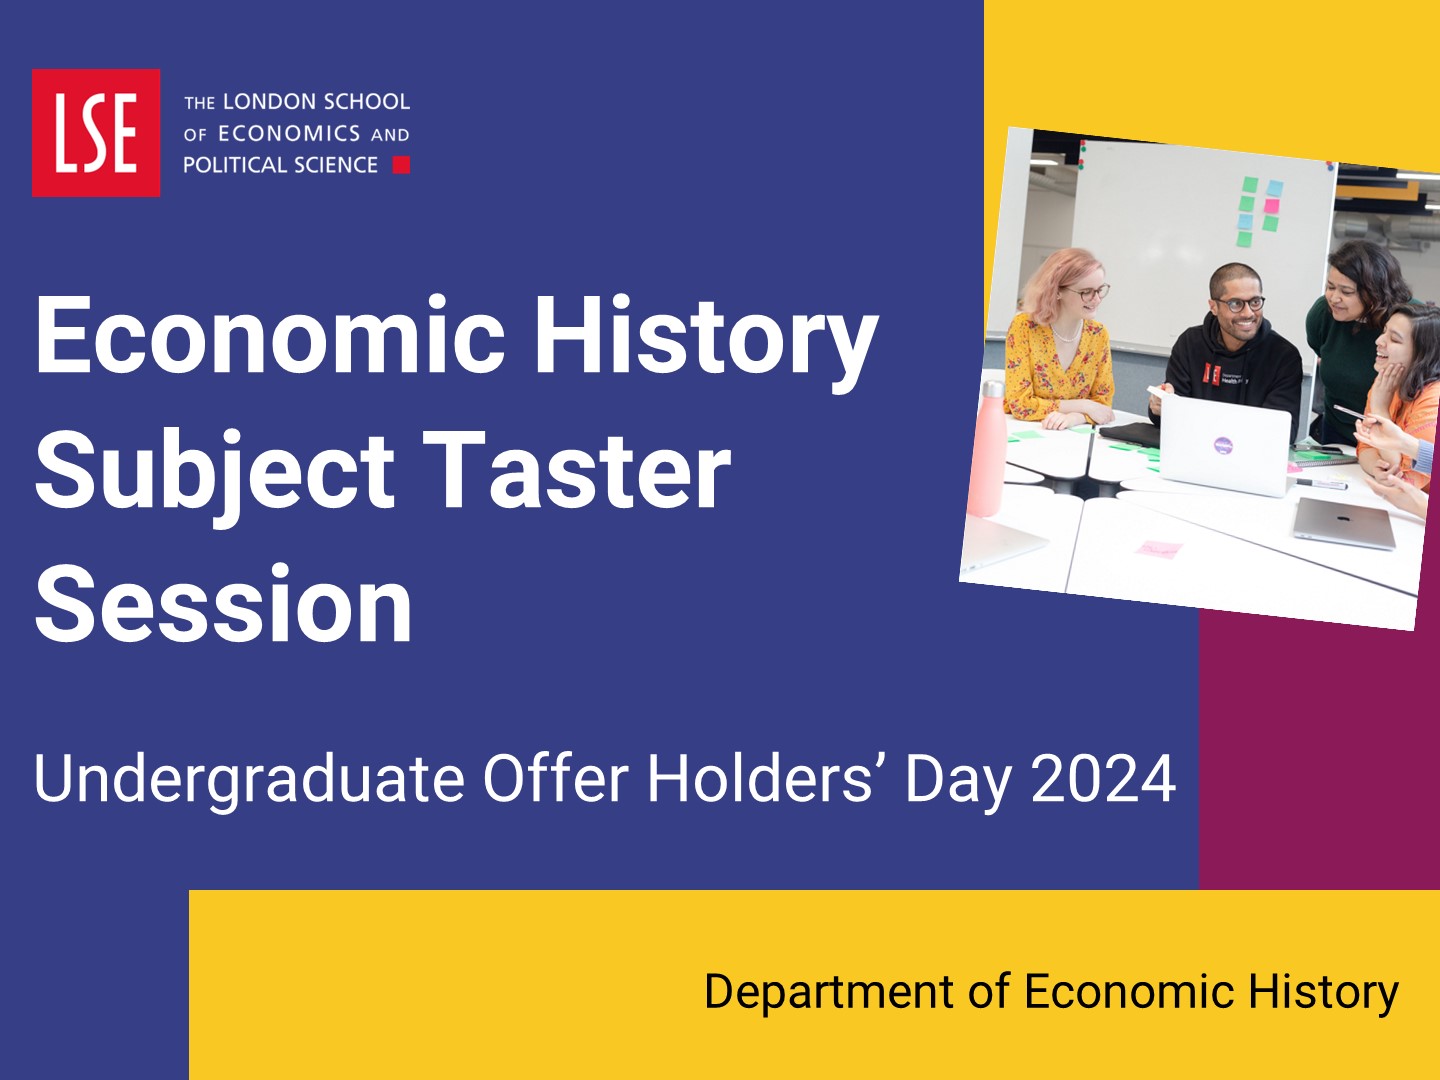 Watch the economic history subject taster session